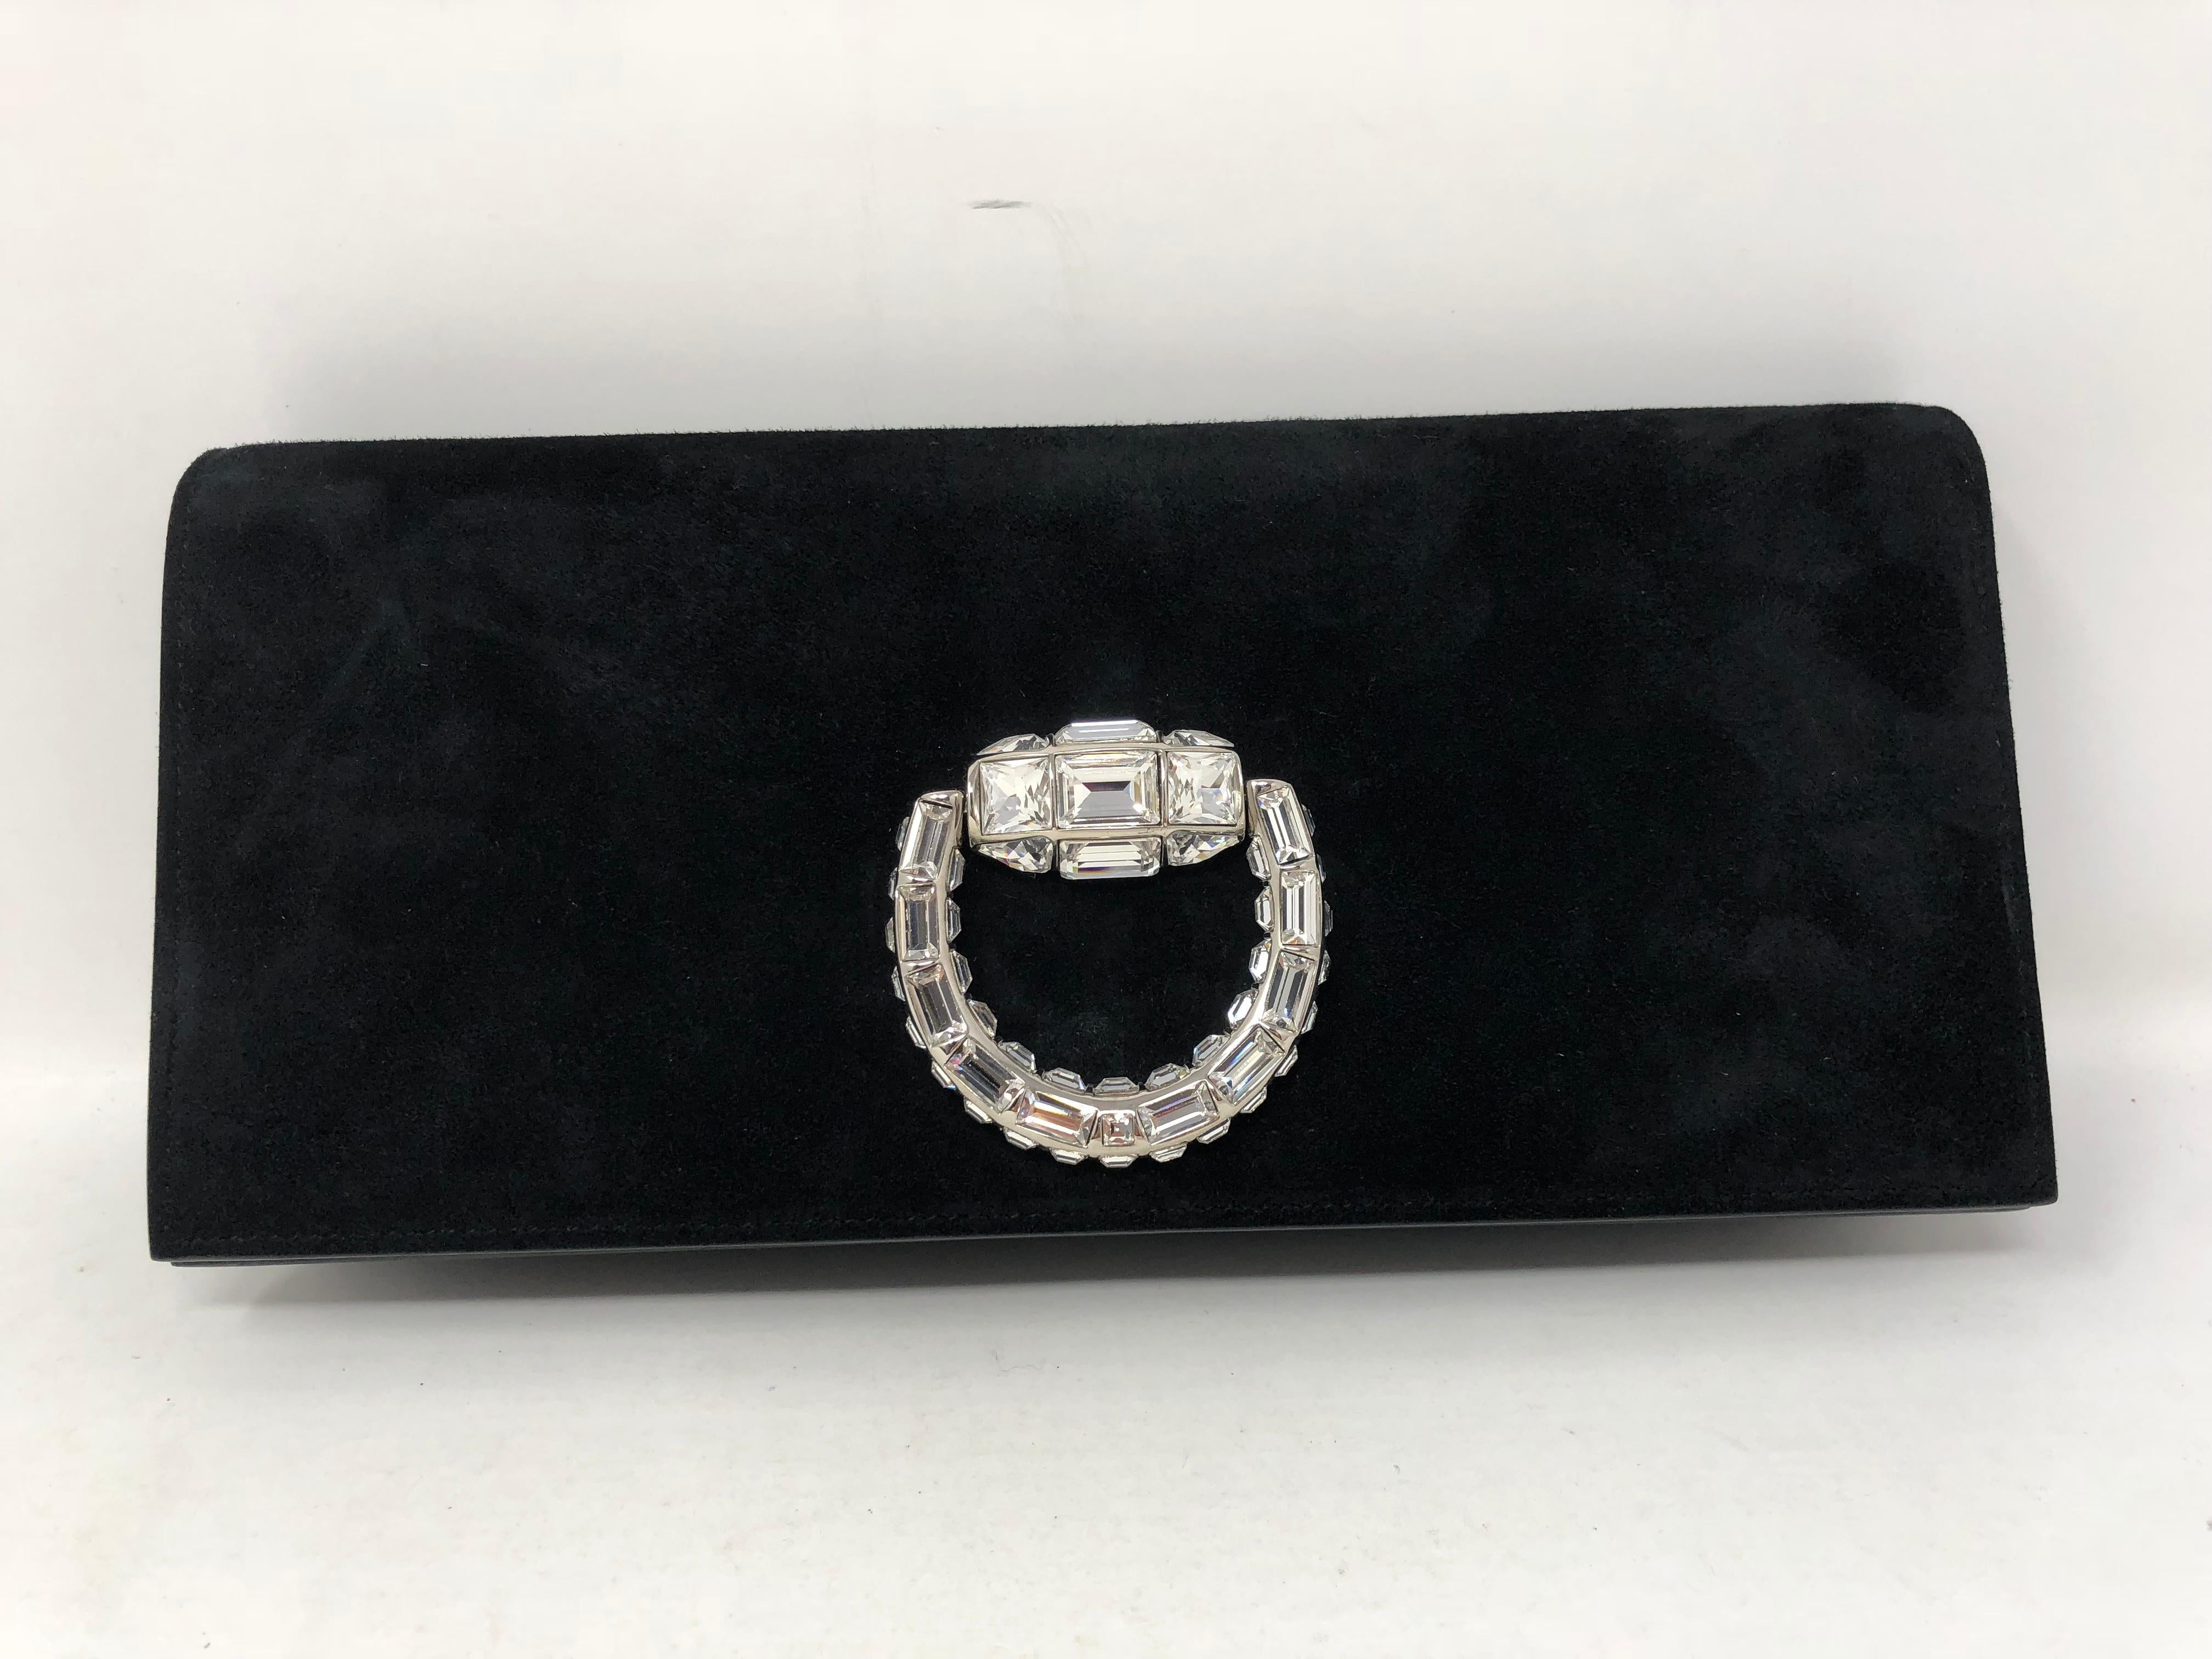 Gucci Black Suede Evening Clutch with Swarovski Crystal Clasp. Stunning and elegant clutch for any Special event. Mint like new condition and ready for the Gala. Guaranteed authentic. 